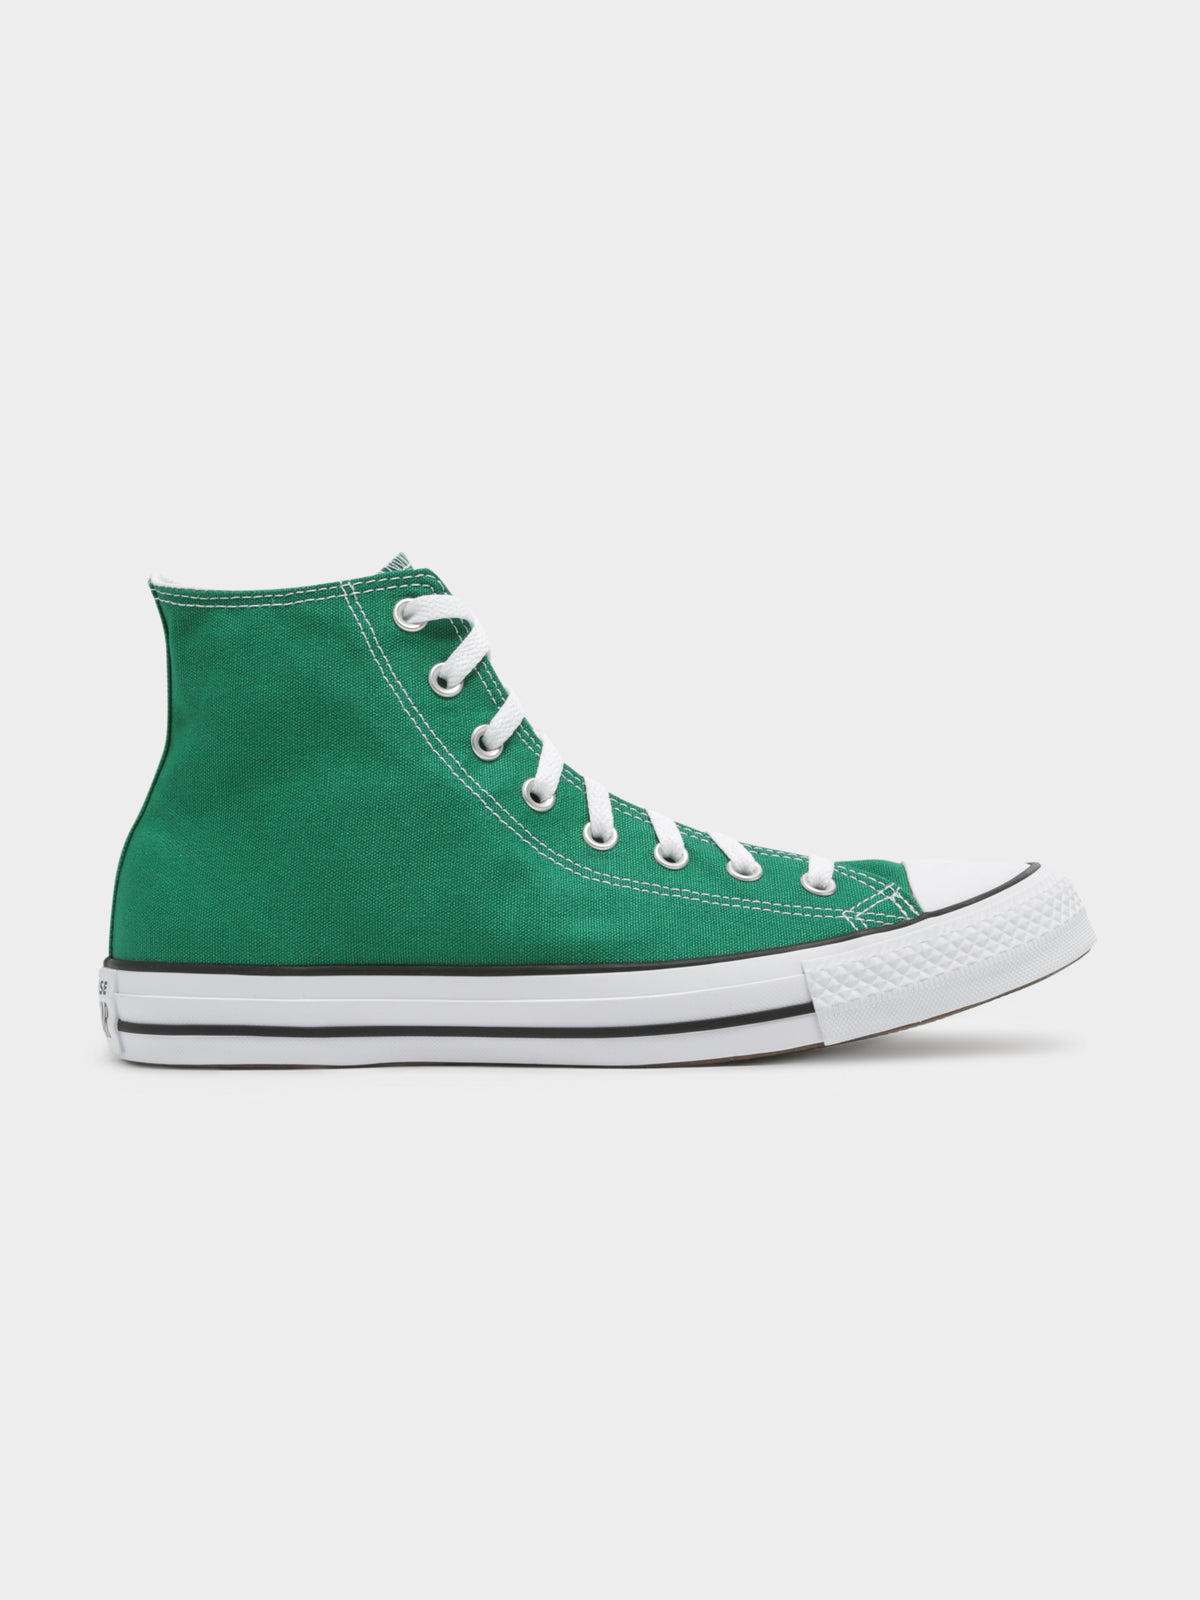 Unisex Chuck Taylor All Star High Sneakers in Amazon Green